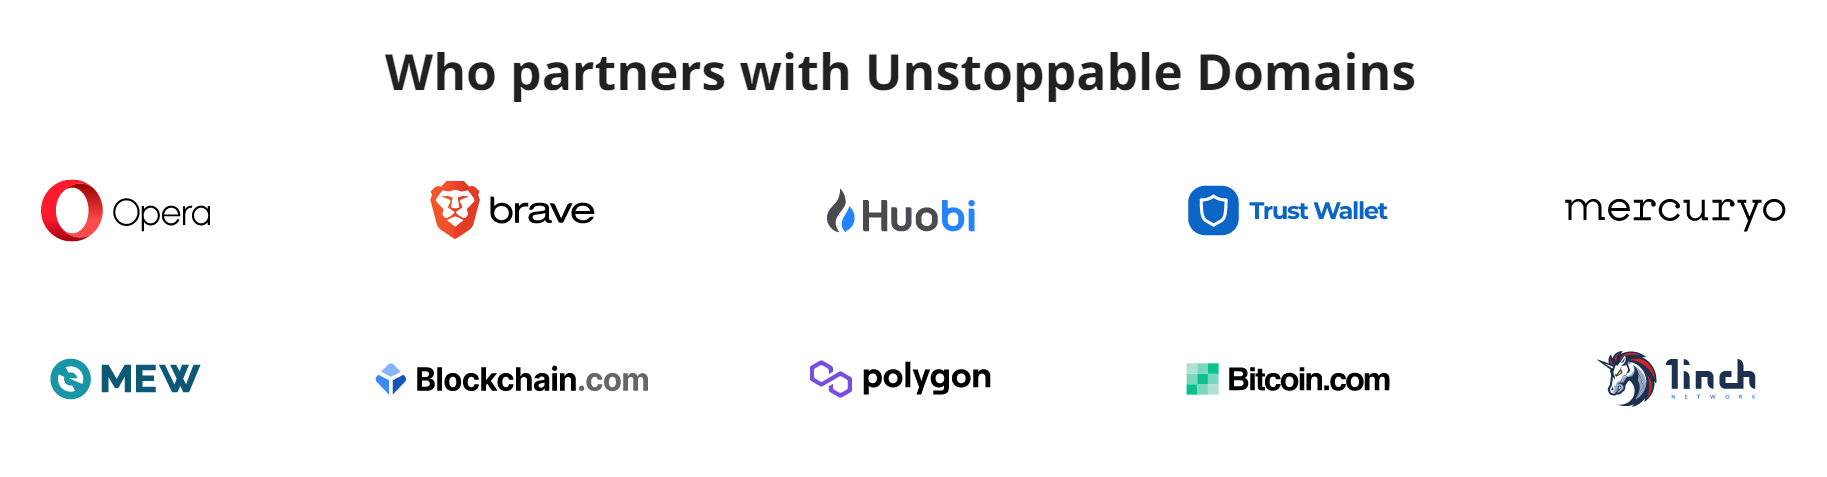 Unstoppable Domains Partners